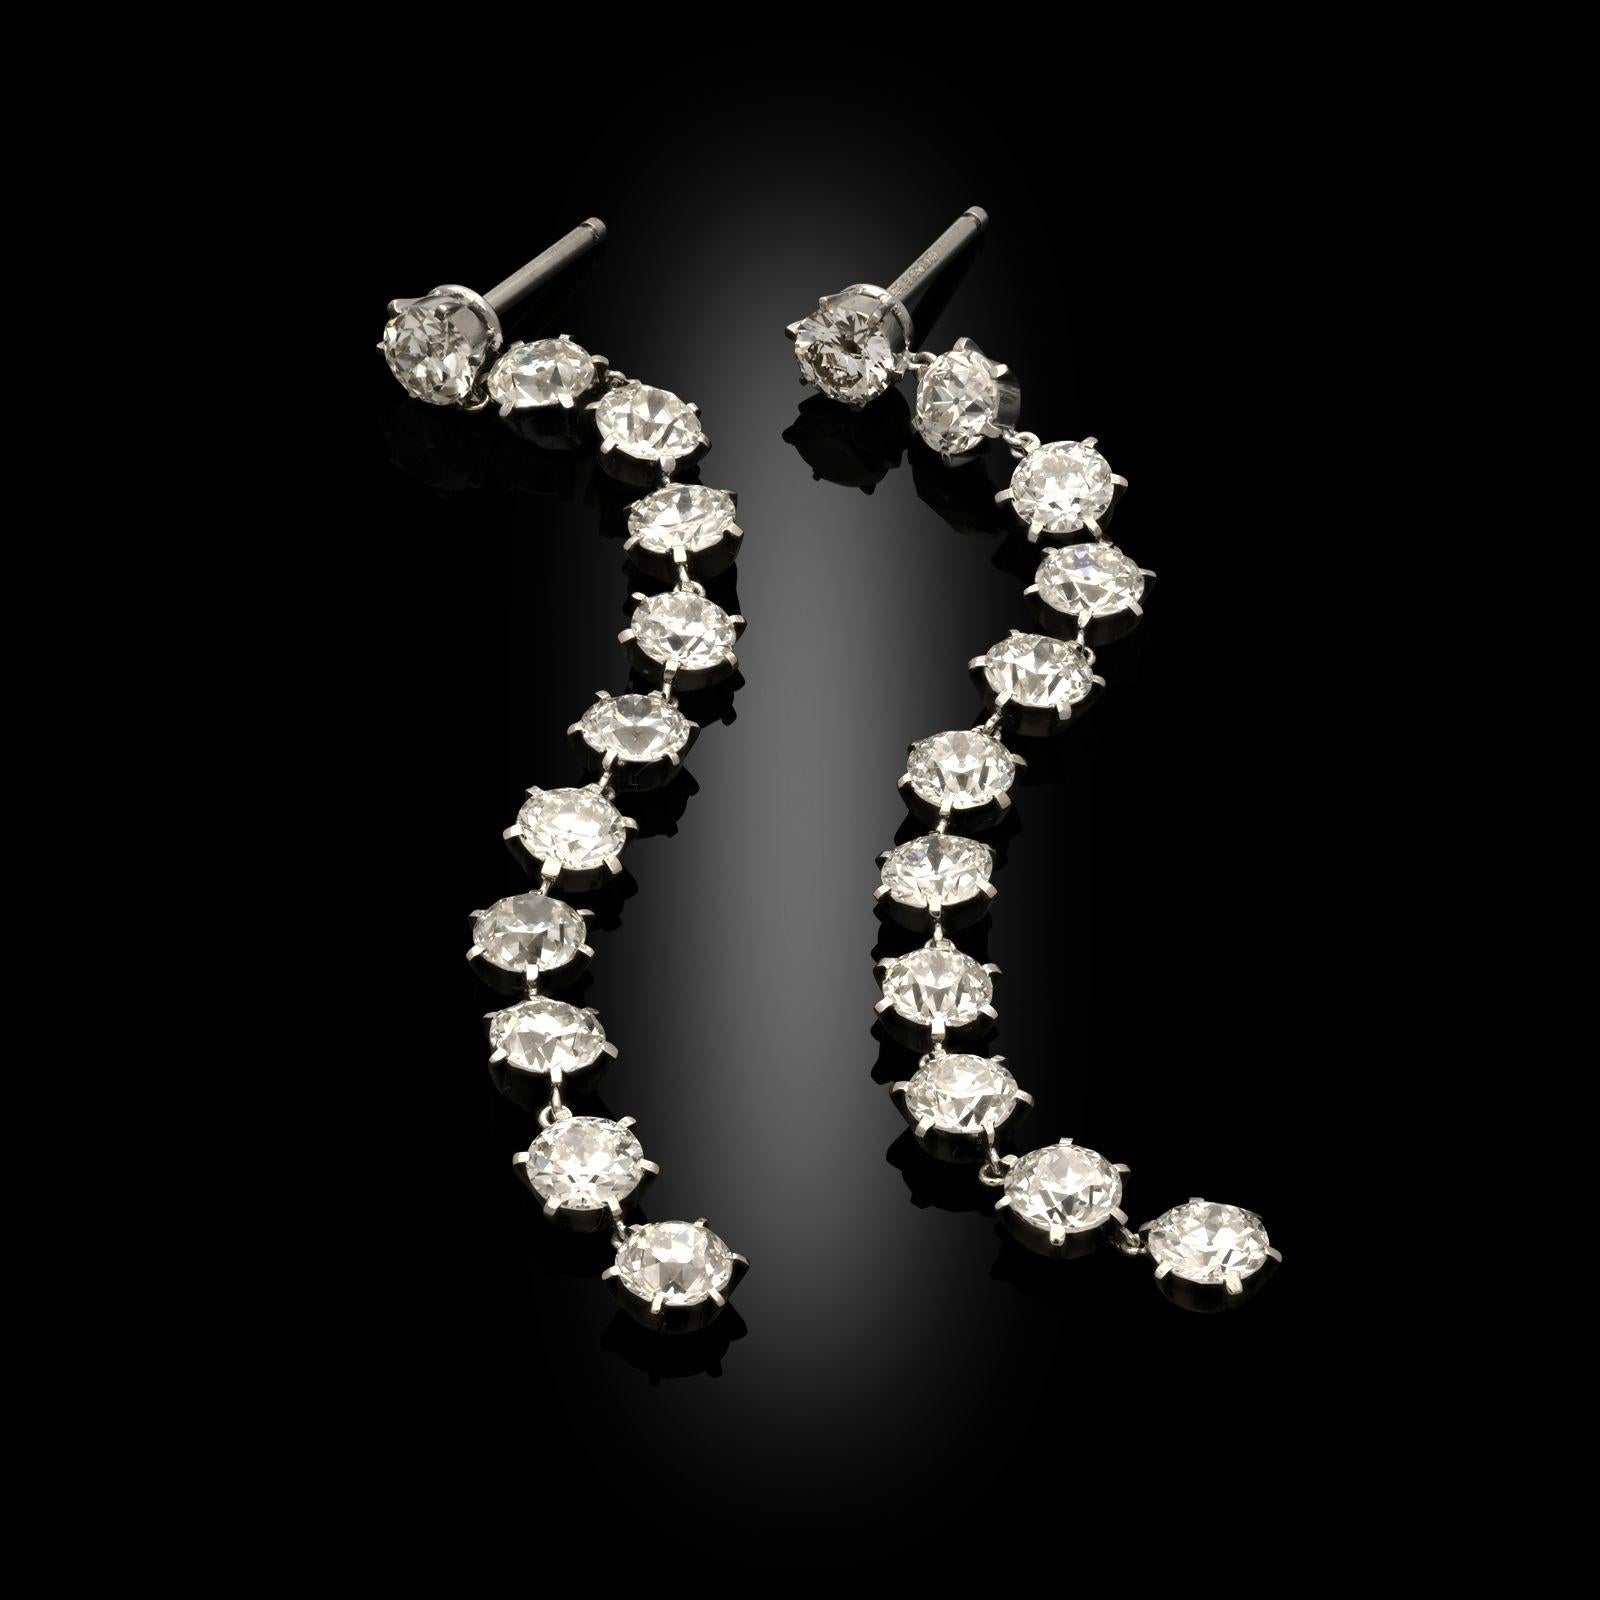 A pair of old cut diamond drop earrings by Hancocks. These earrings are designed as a single long line of old European cut diamonds, each in platinum claw set mount with articulation between each diamond. Each earring has eleven diamonds with the